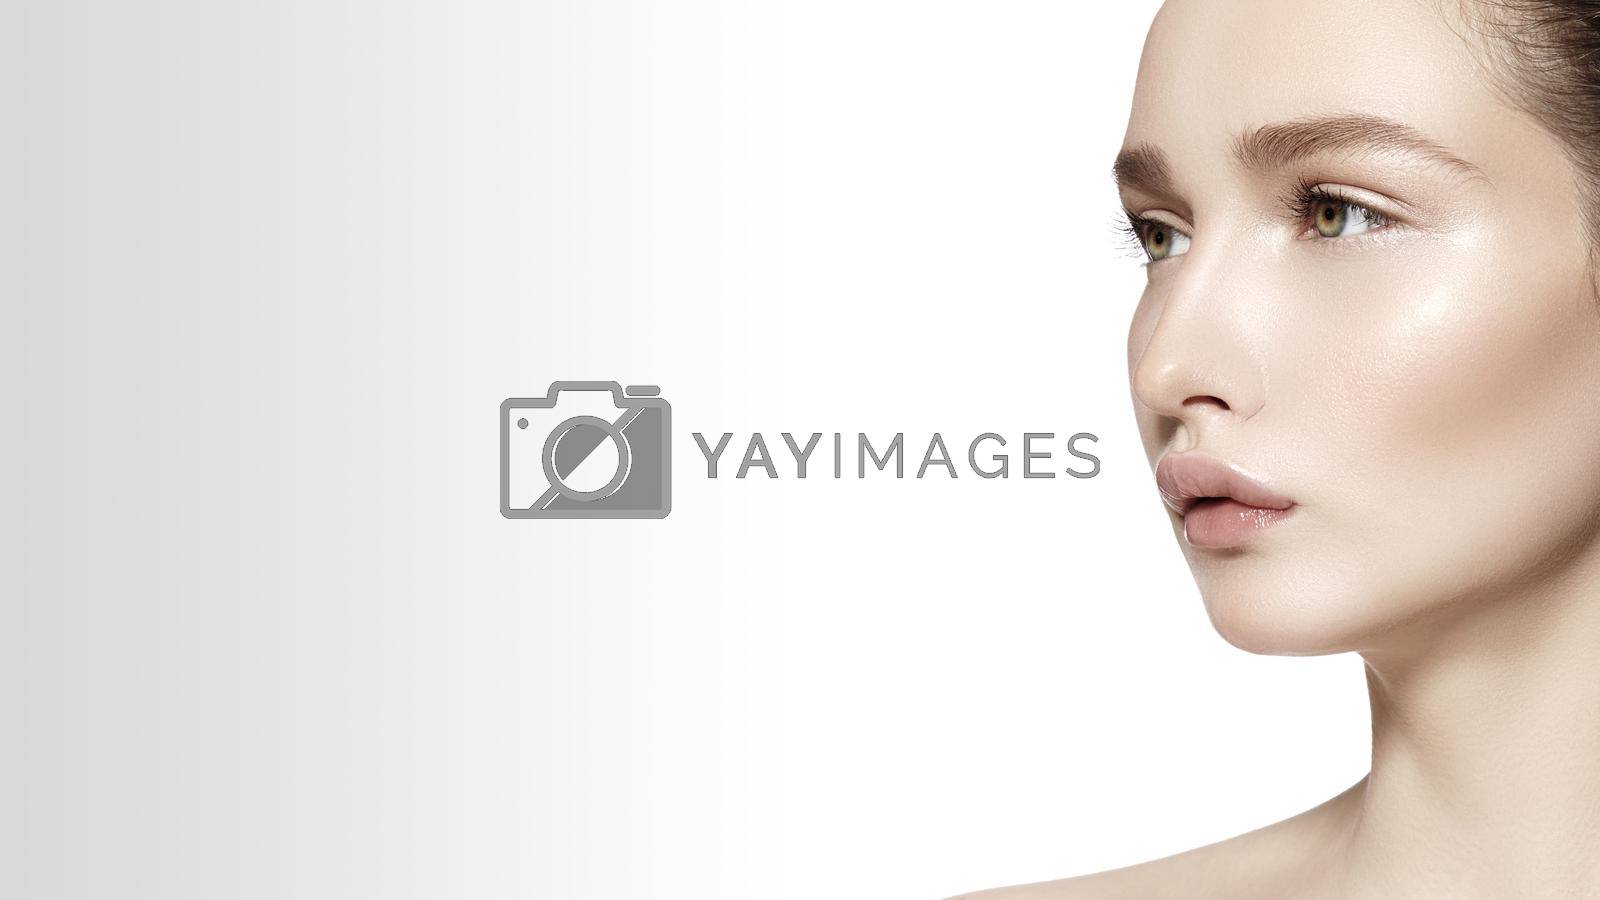 Royalty free image of Beautiful Face of young Woman. Skincare, Wellness, Spa. Clean soft Skin, healthy Fresh look. Natural daily makeup by MarinaFrost